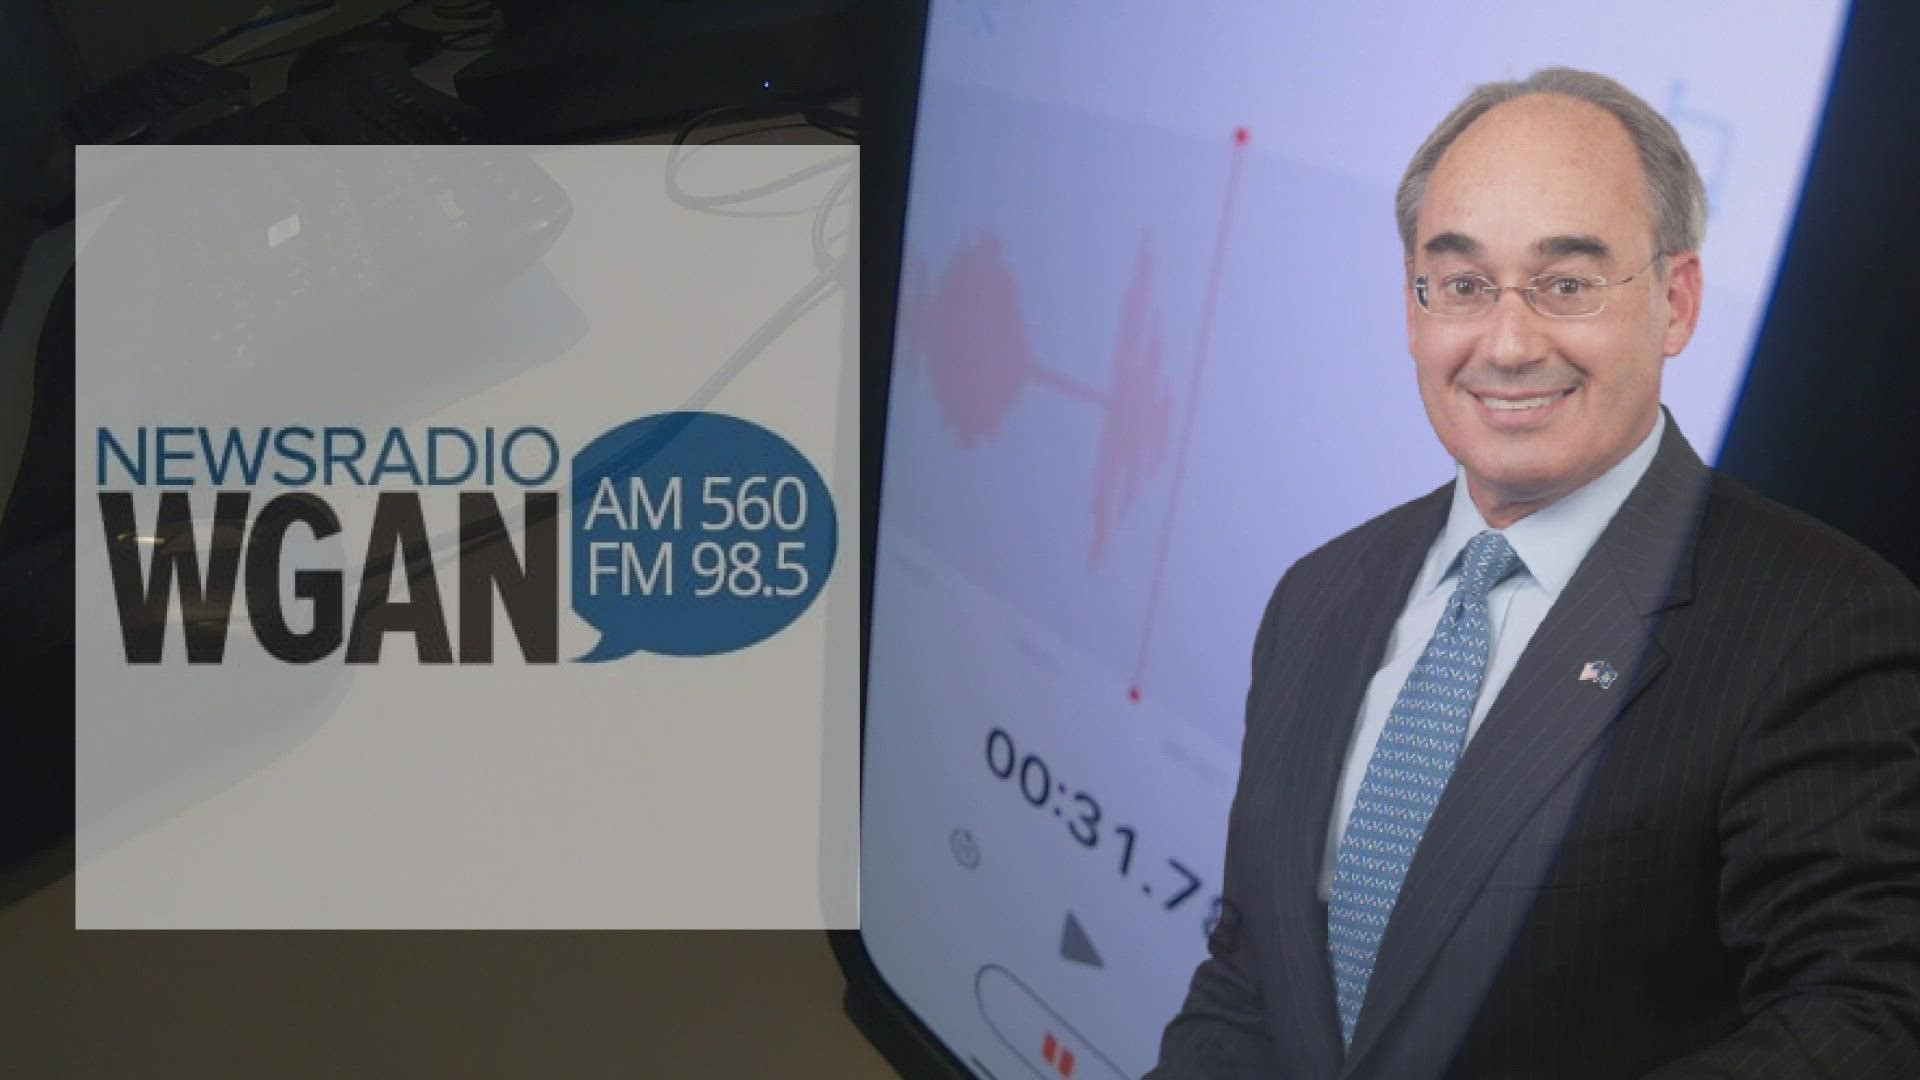 Bruce Poliquin makes reelection announcement on WGAN radio